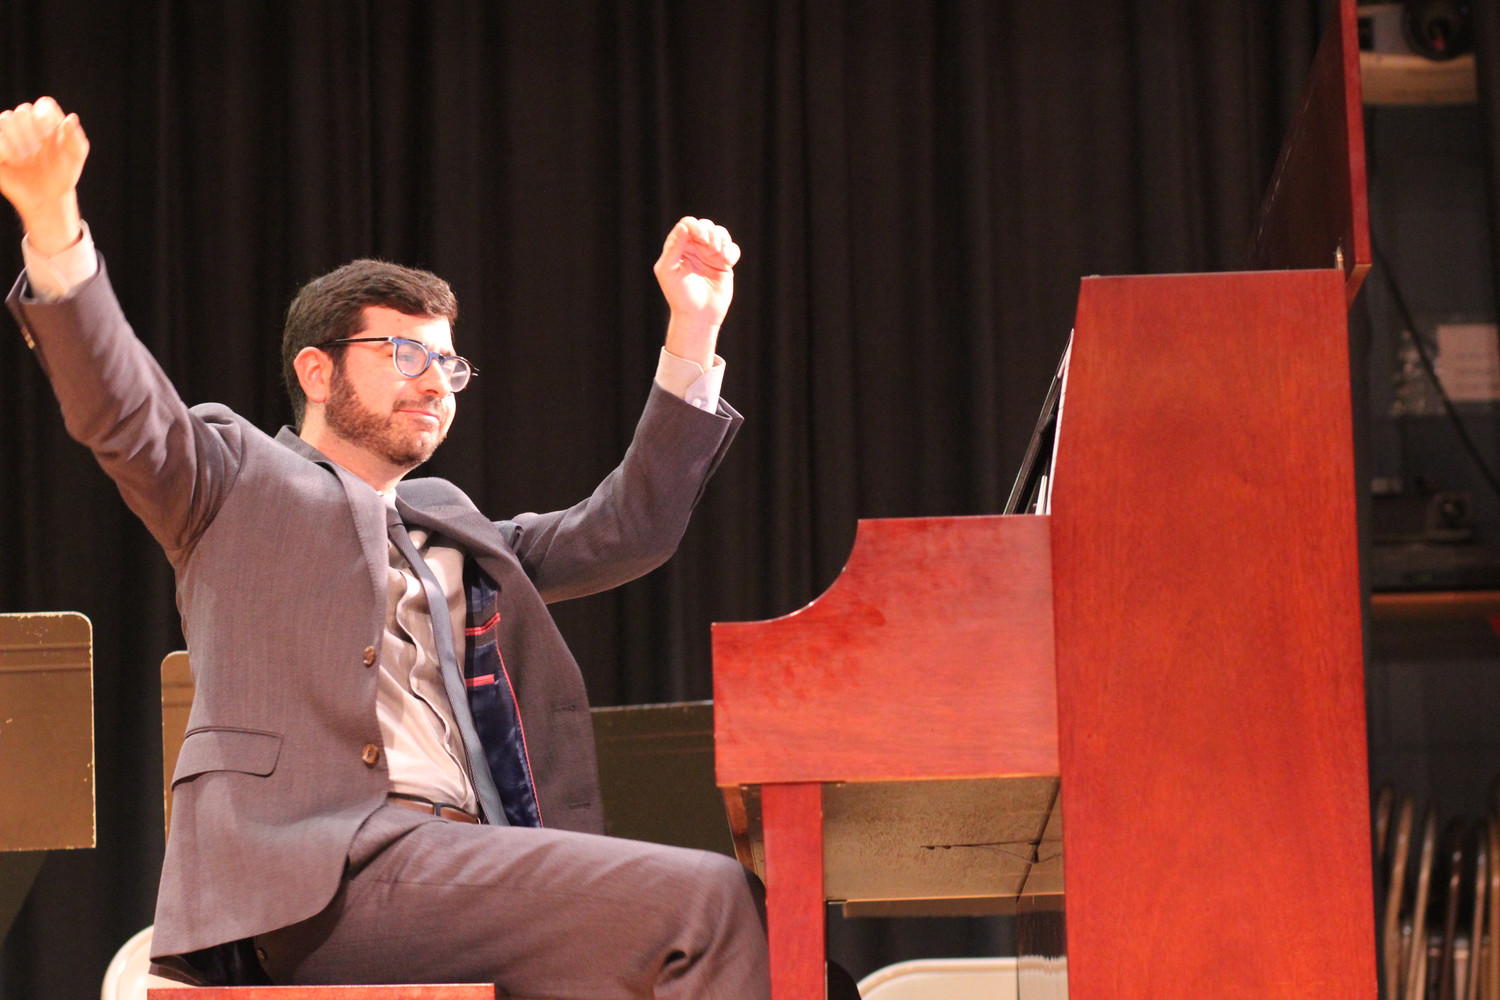 Michael Brown, one of Rothgarber’s former students, performed “Blare” during the tribute.